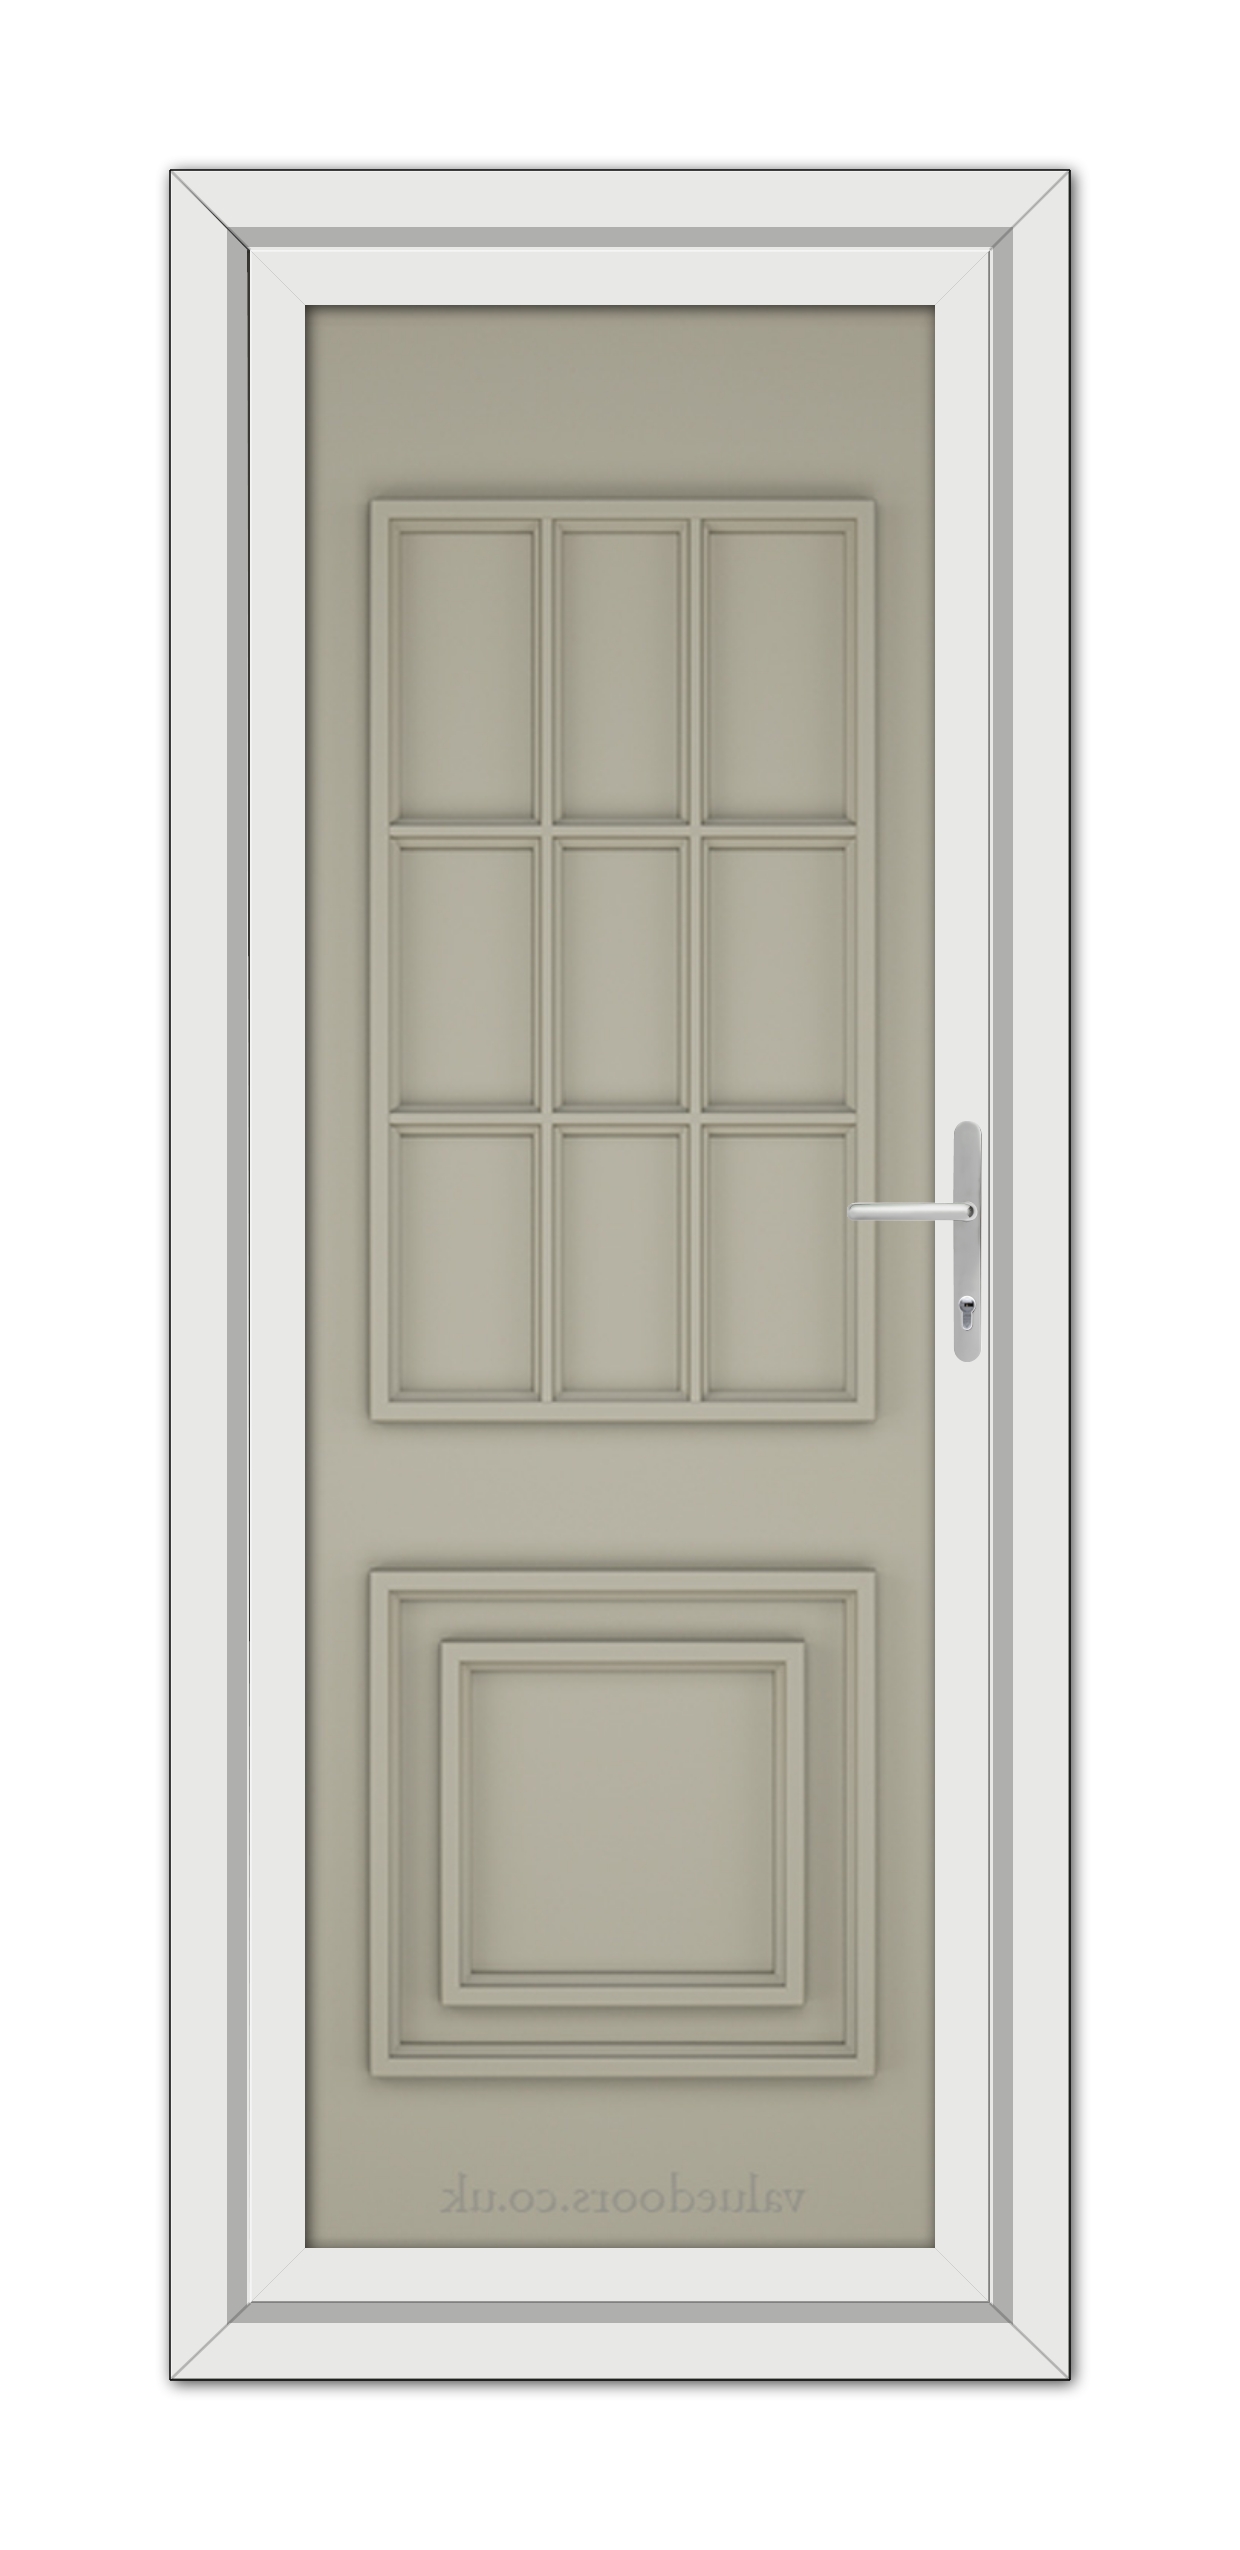 A closed vertical interior door in a white frame, featuring a pebble grey color with a nine-panel design and a metallic handle on the right side.